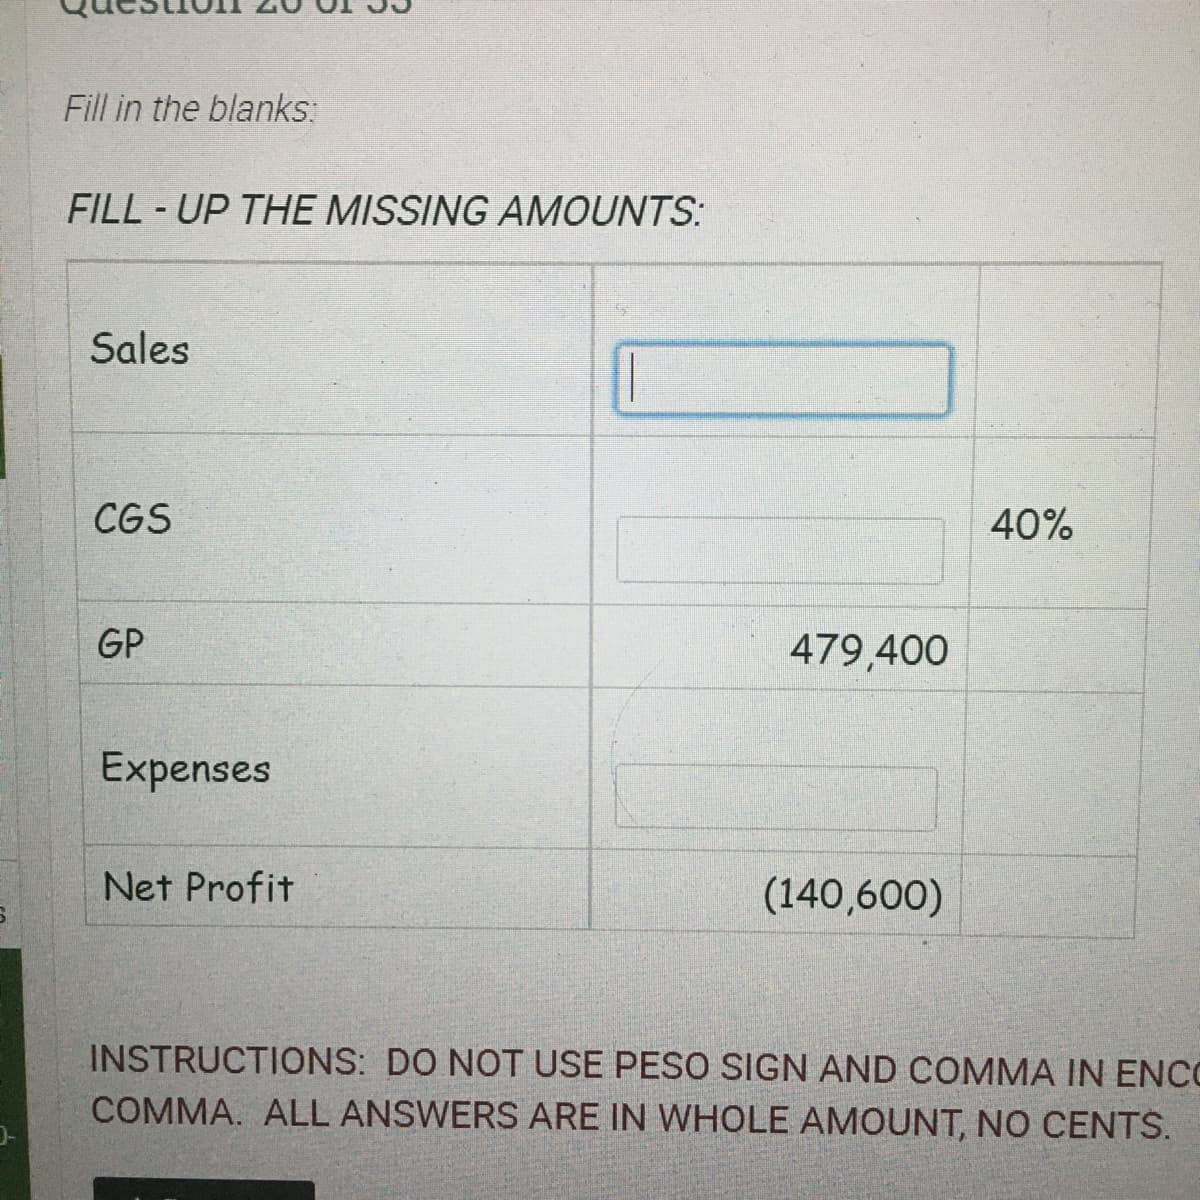 Fill in the blanks:
FILL - UP THE MISSING AMOUNTS:
Sales
CGS
40%
GP
479,400
Expenses
Net Profit
(140,600)
INSTRUCTIONS: DO NOT USE PESO SIGN AND COMMA IN ENCO
COMMA. ALL ANSWERS ARE IN WHOLE AMOUNT, NO CENTS.
